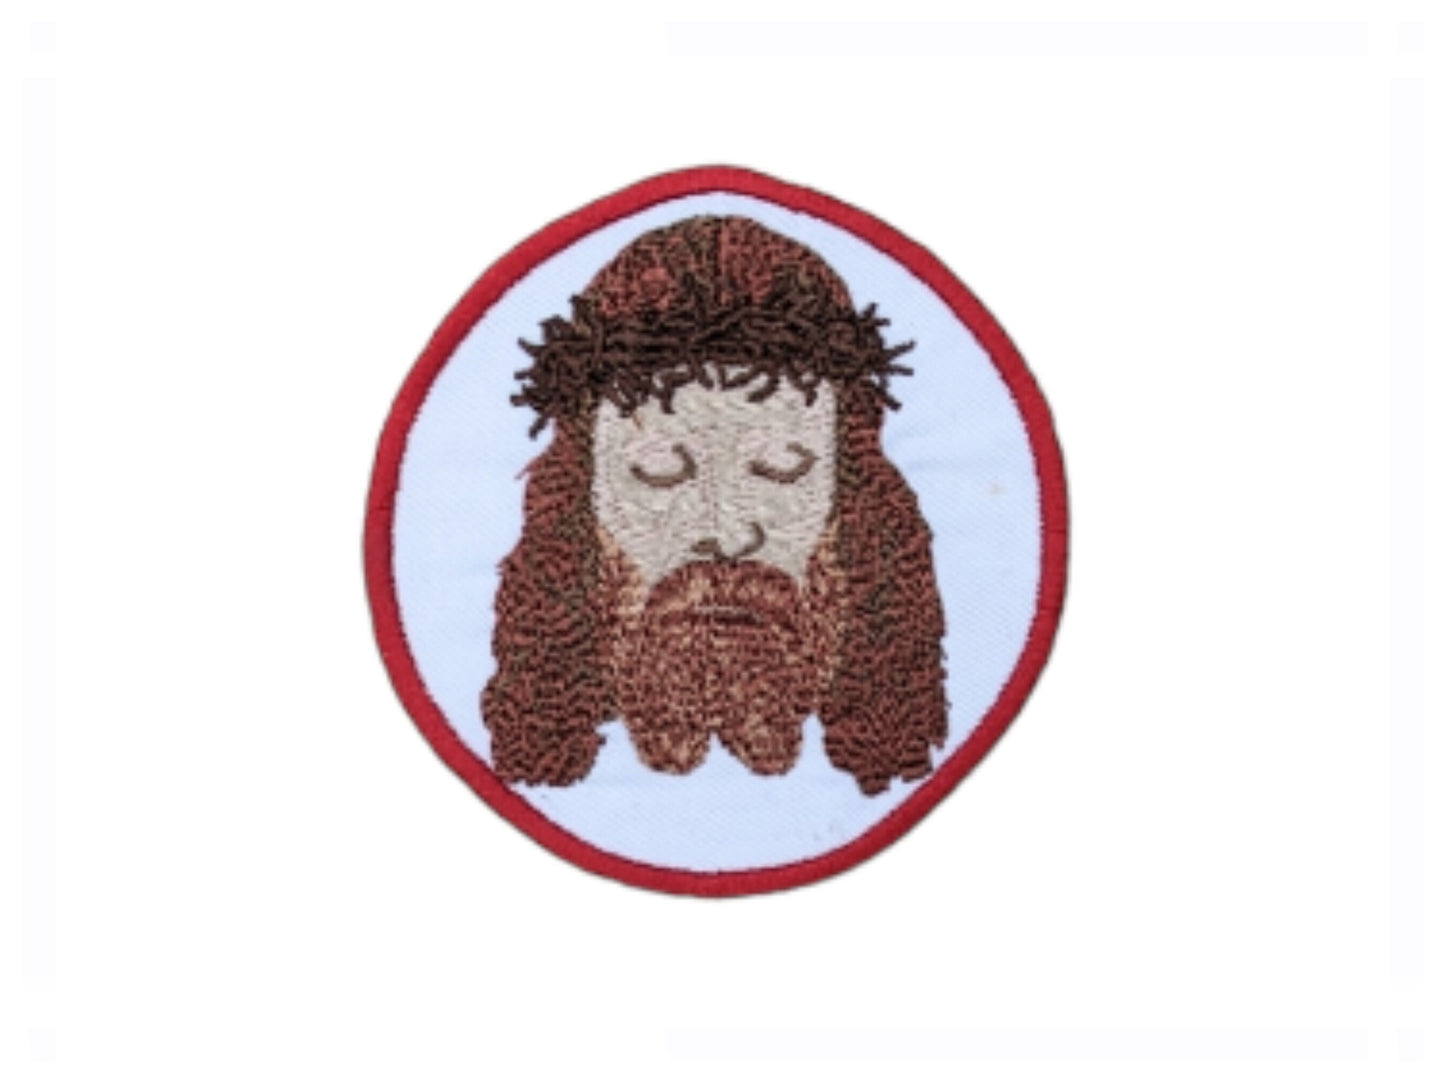 Holy Face of Jesus, Religious badge, religious patch, iron on badge, sew on patch, embroidered badge, embroidered patch, pilgrimage, Turin